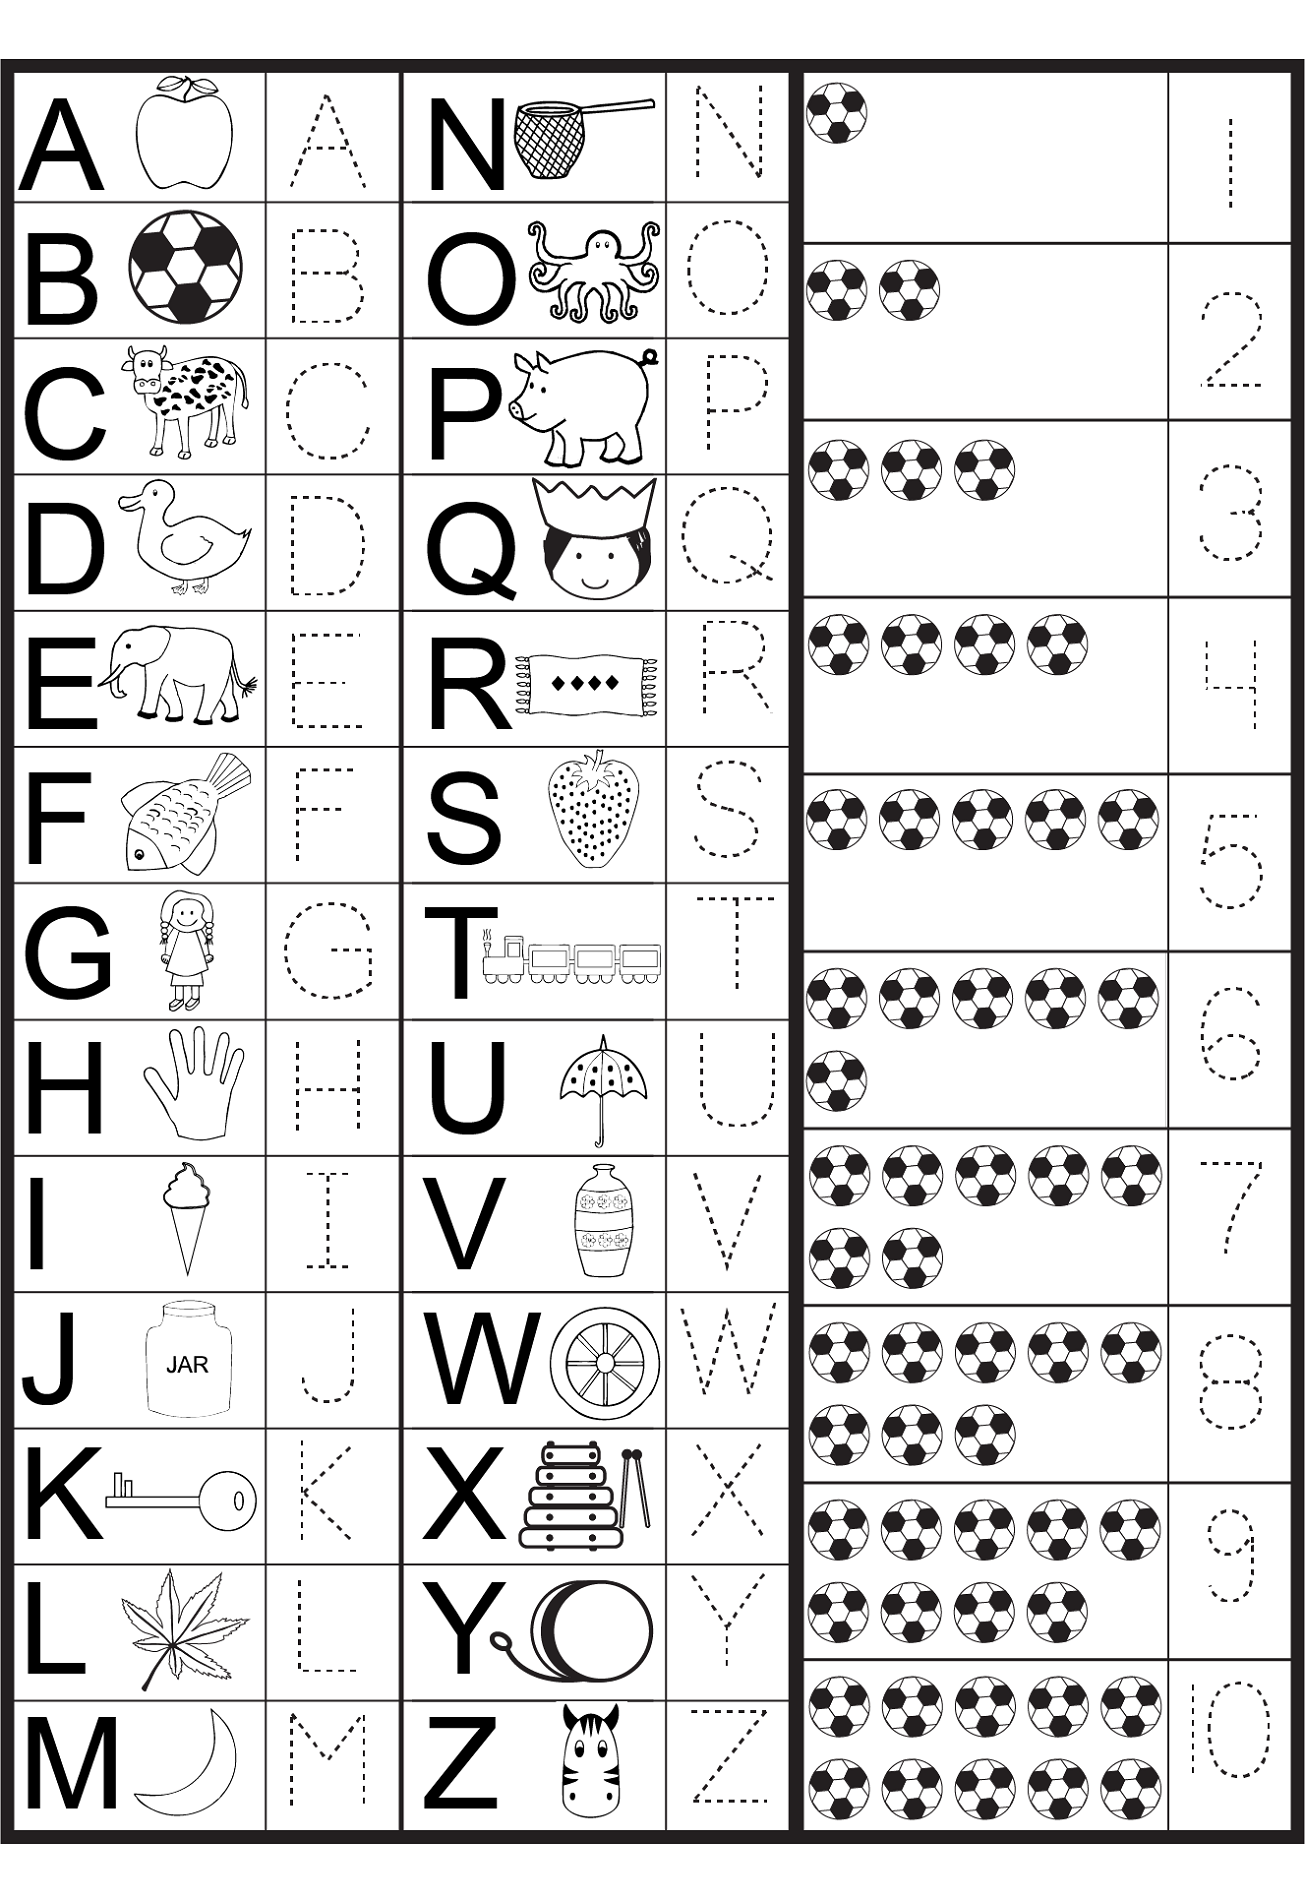 printable-a-b-c-practice-sheets